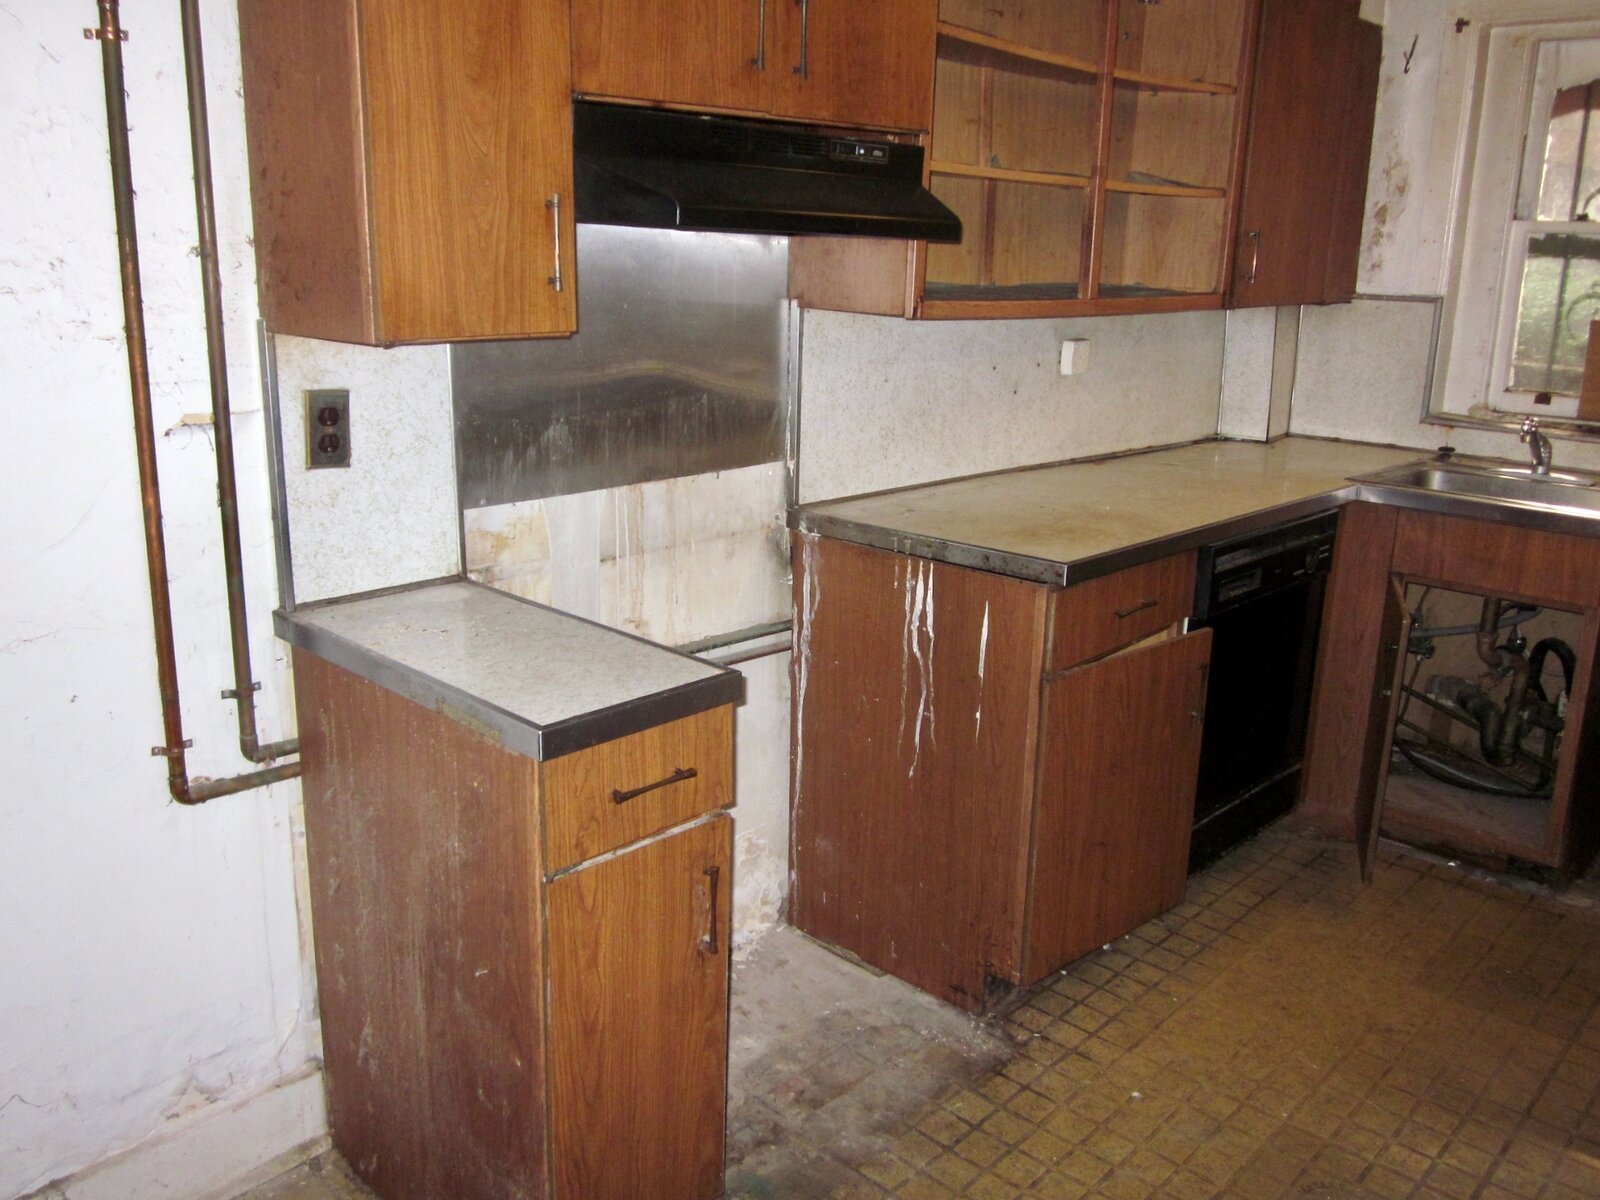  Before: The original kitchen was in the back of the basement. 